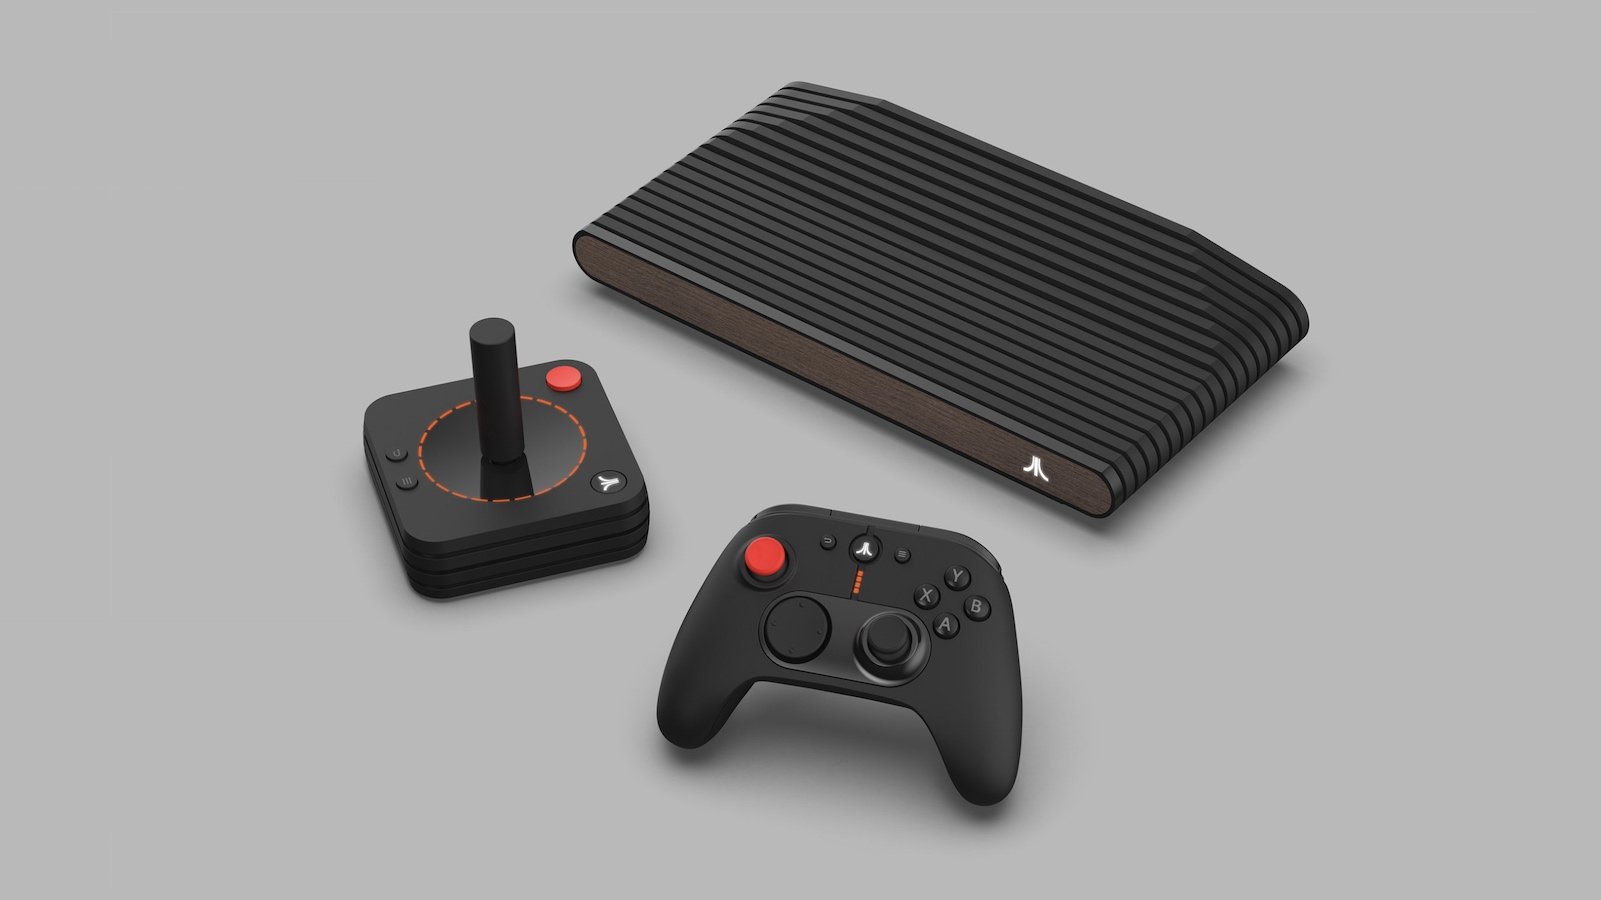 Atari VCS 2020 gaming and computer system blends the best of PCs and consoles